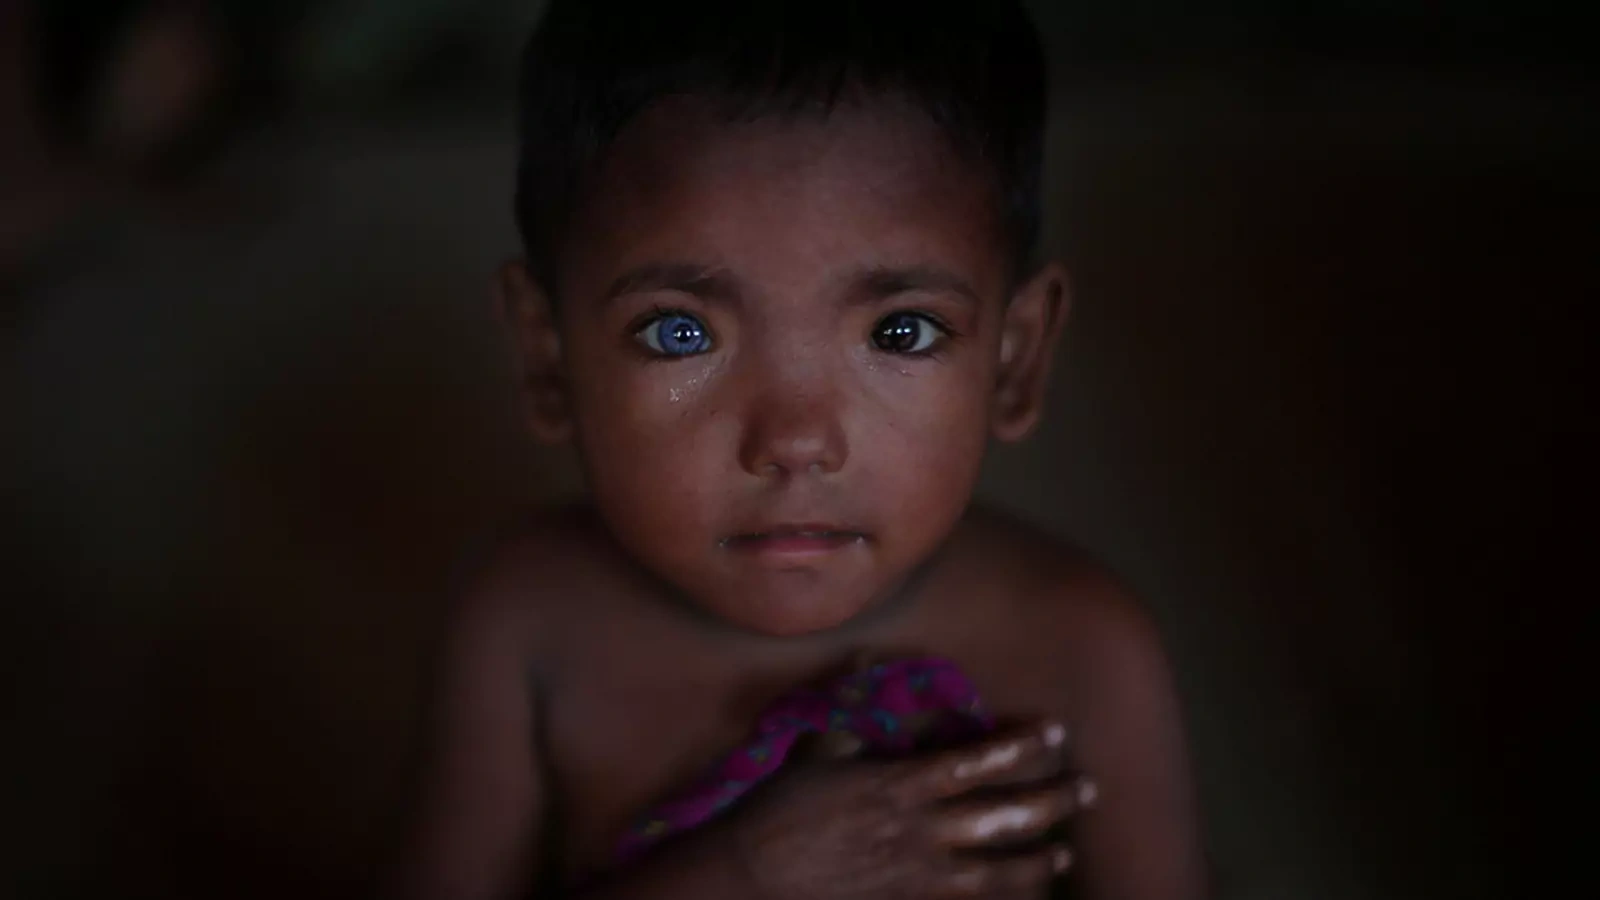 A Rohingya child is seen in a refugee encampment in Bangladesh.